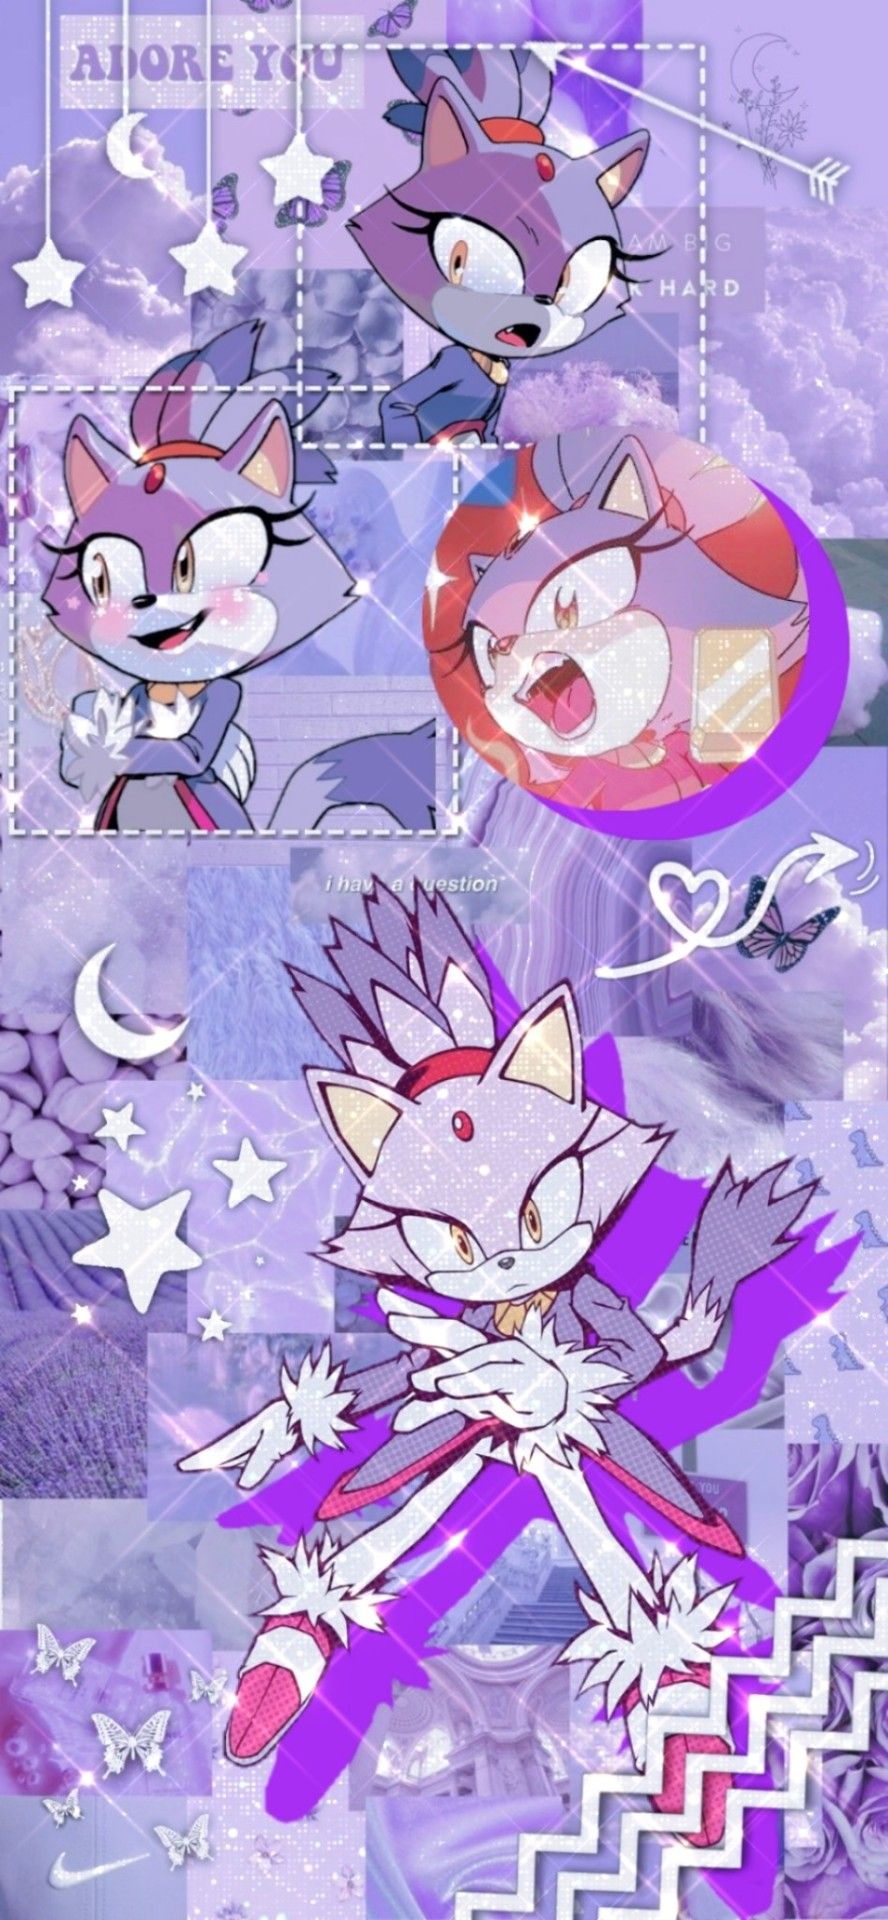 Sonic the hedgehog and his friends in a purple background - Sonic